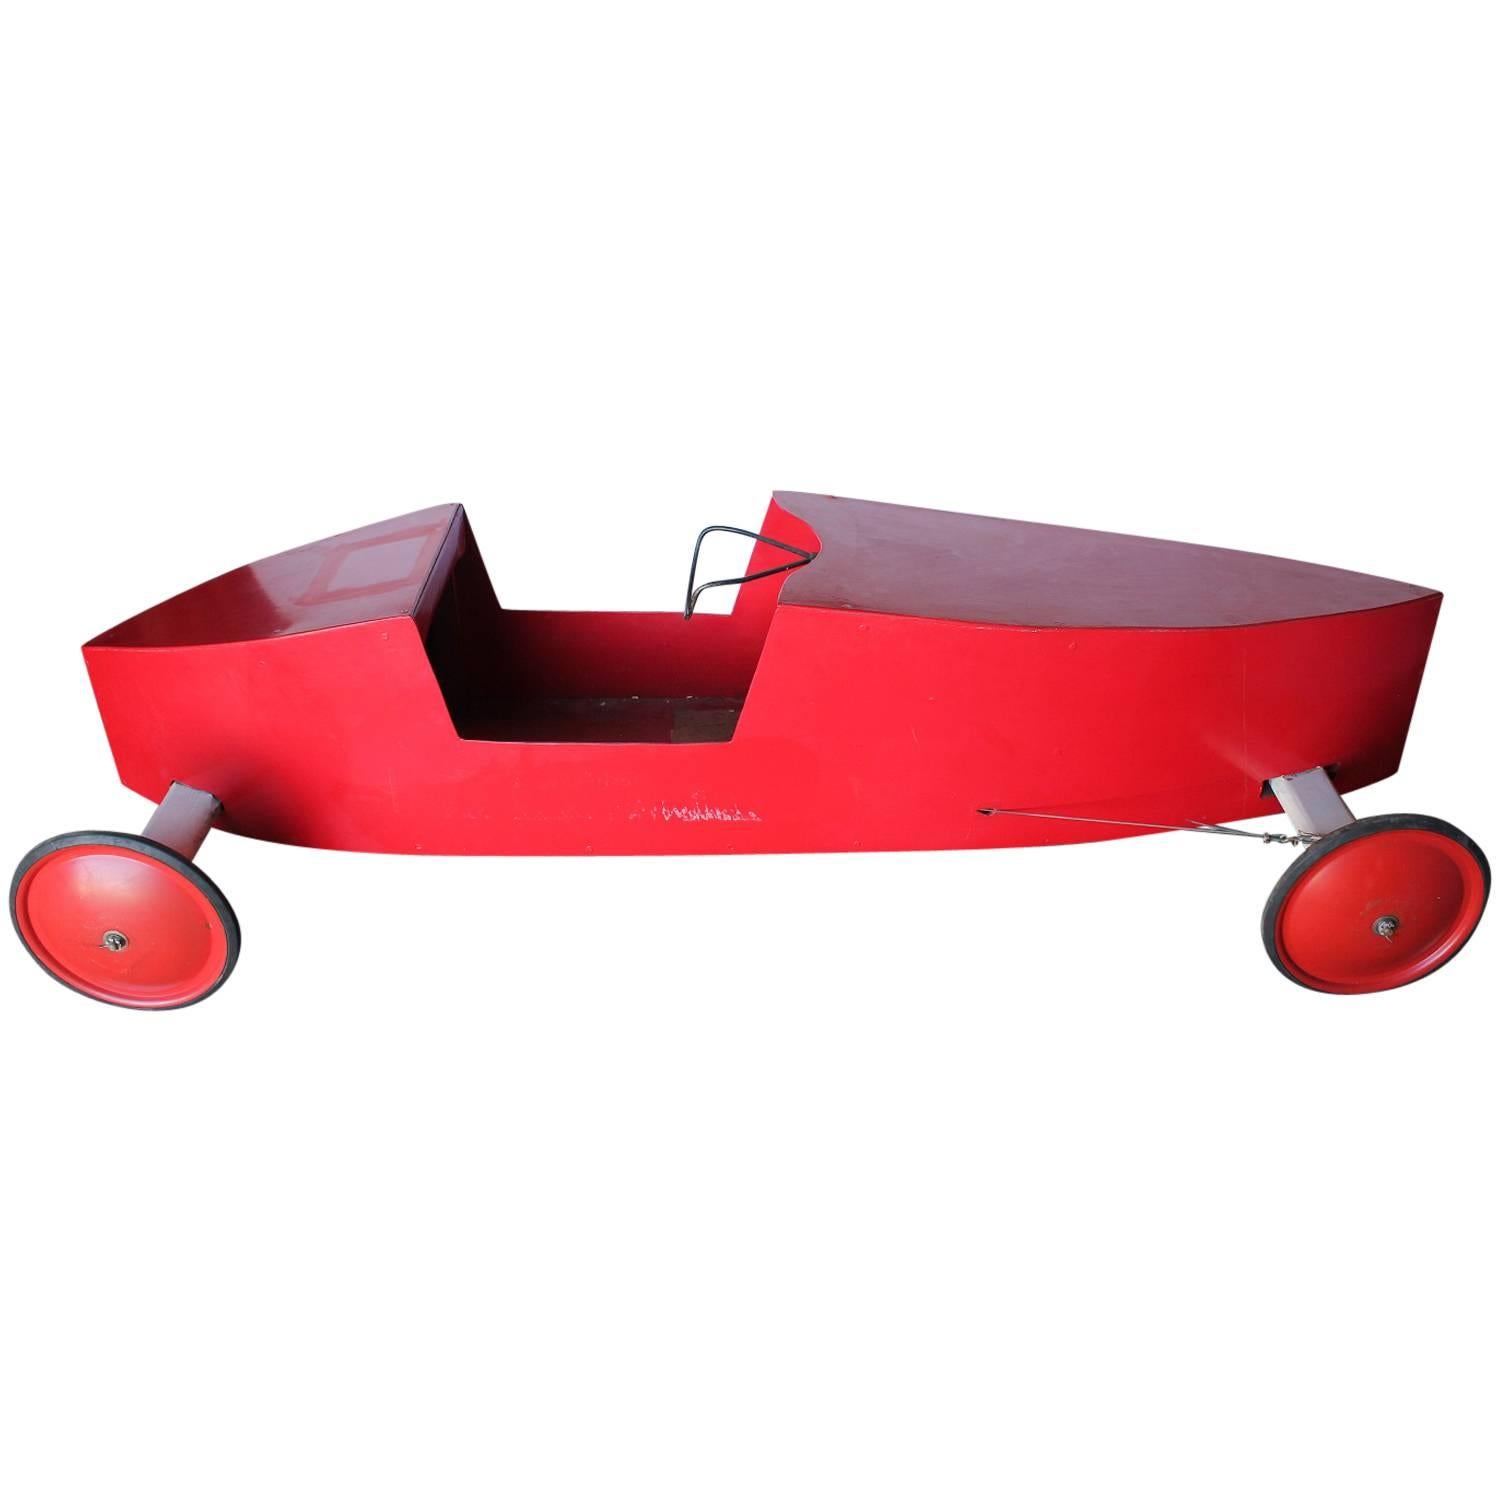 1950s Soap Box Derby Car For Sale